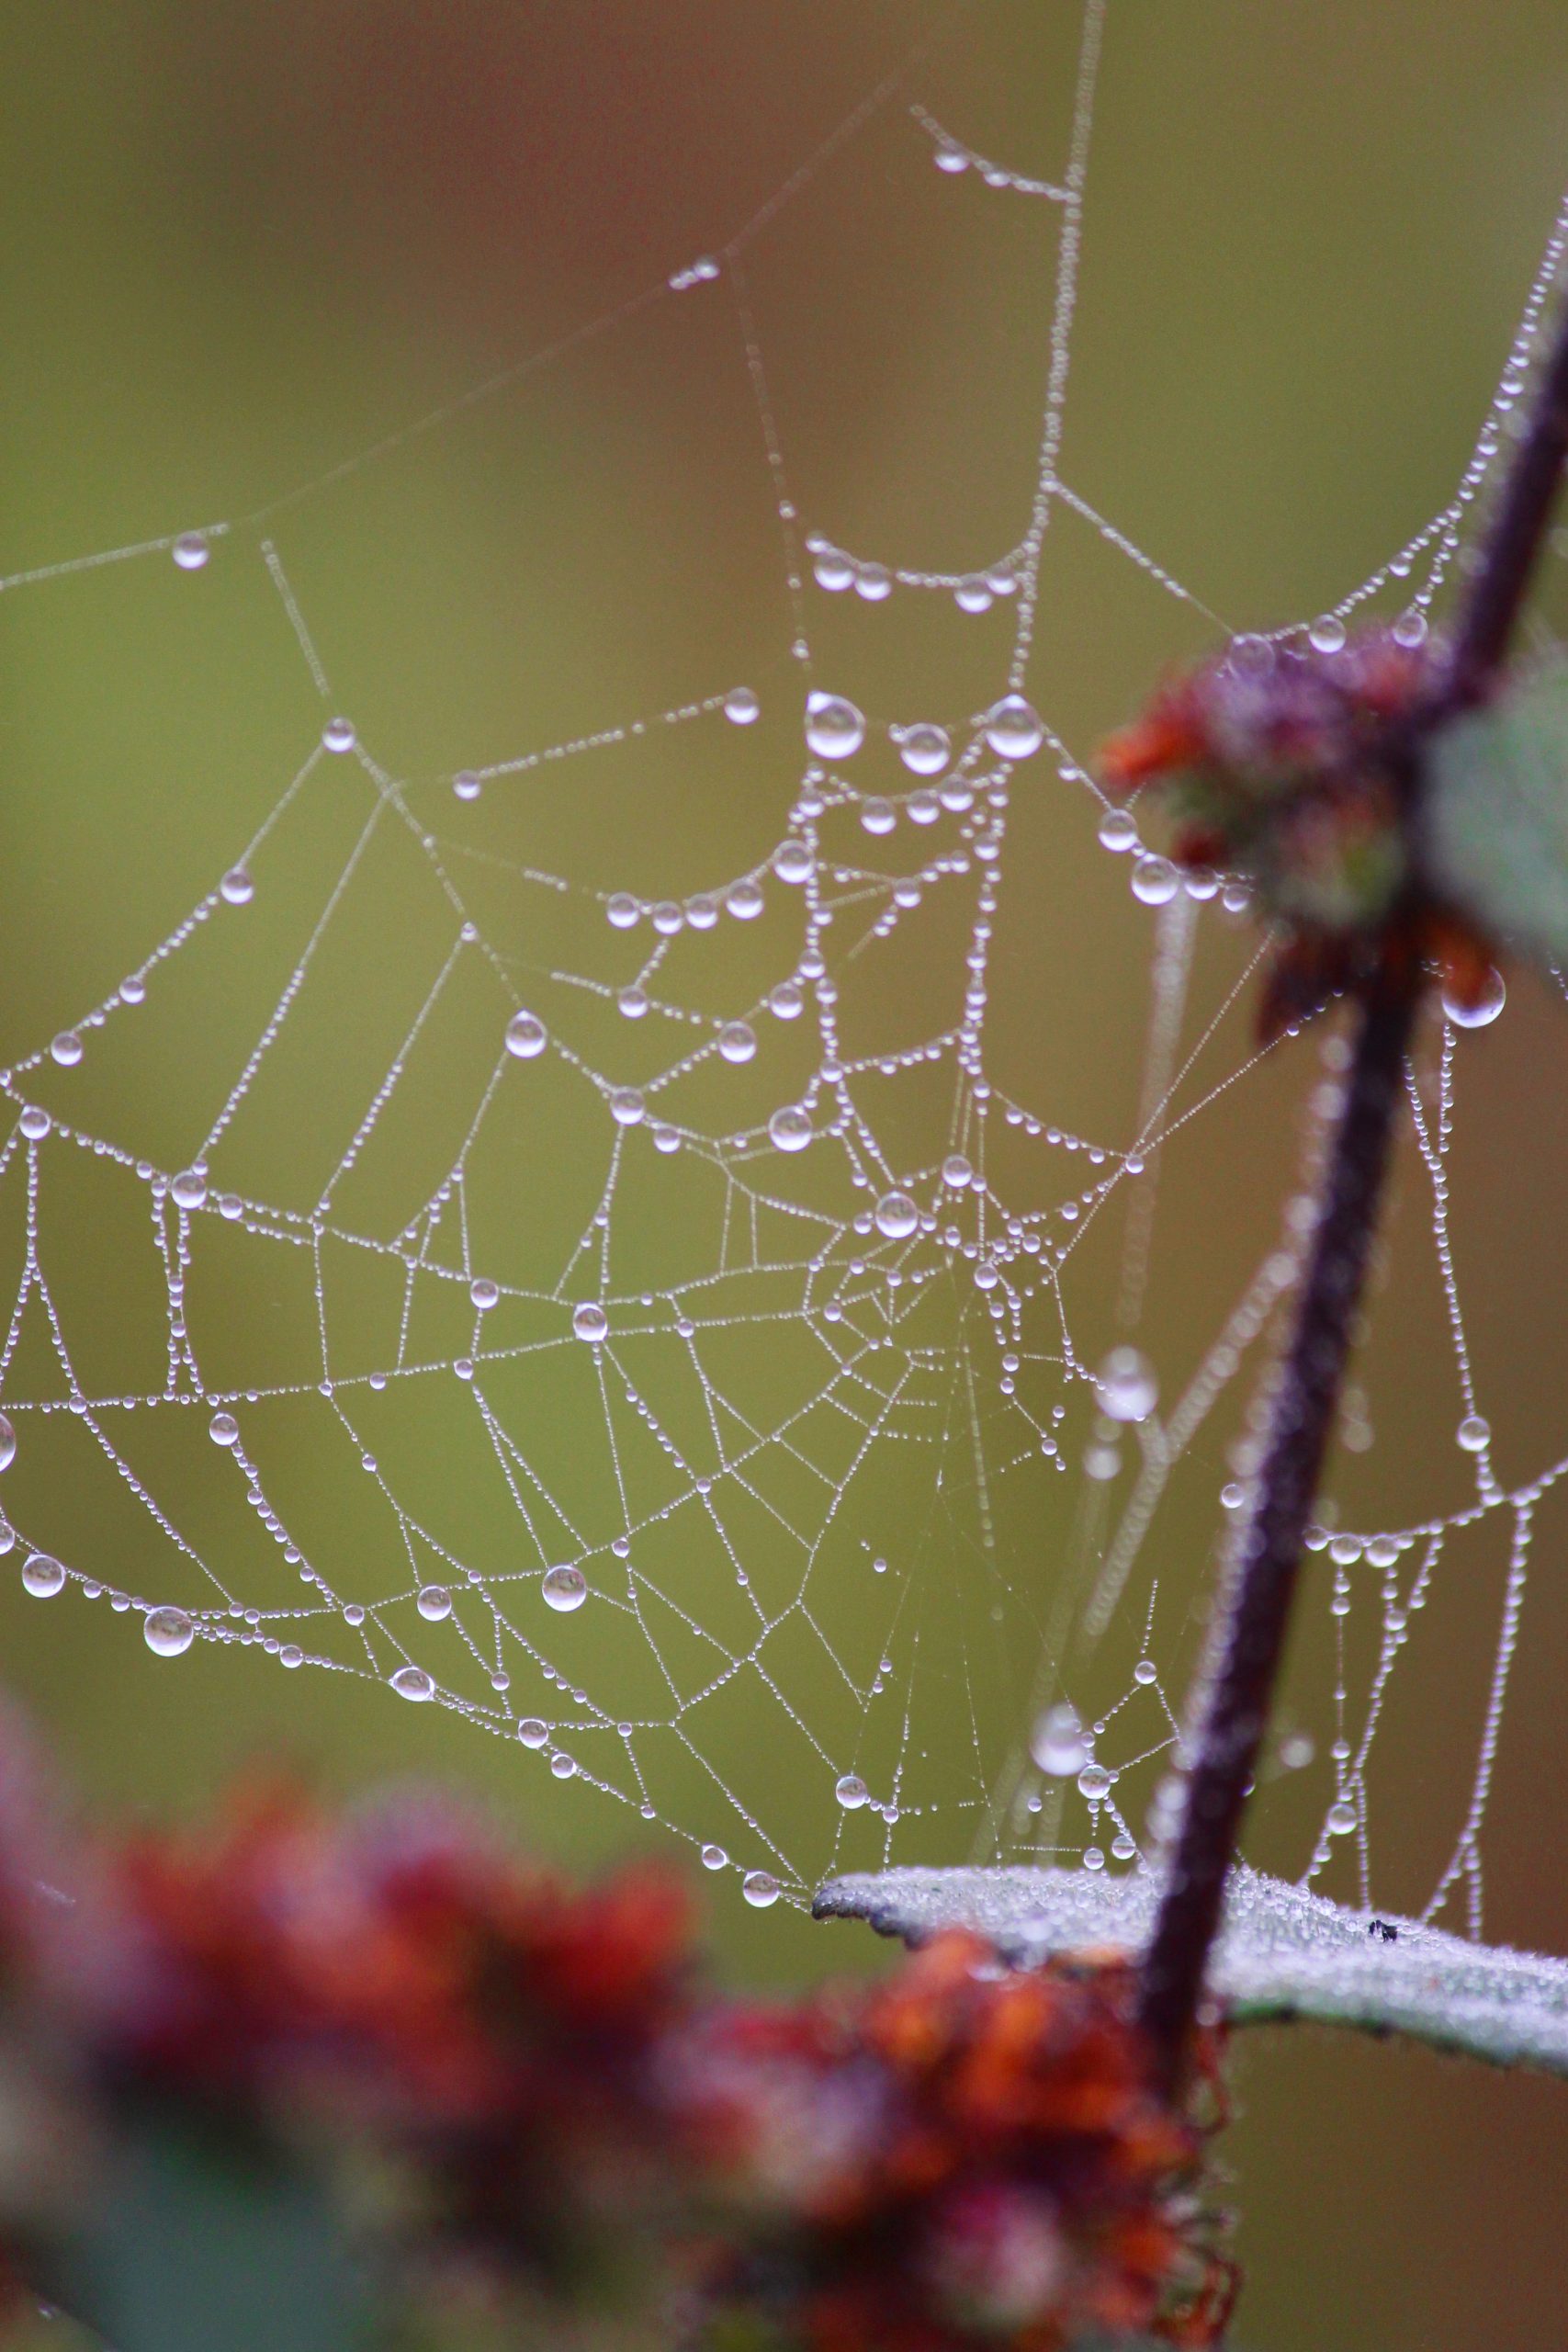 Misty pearls in a cob web